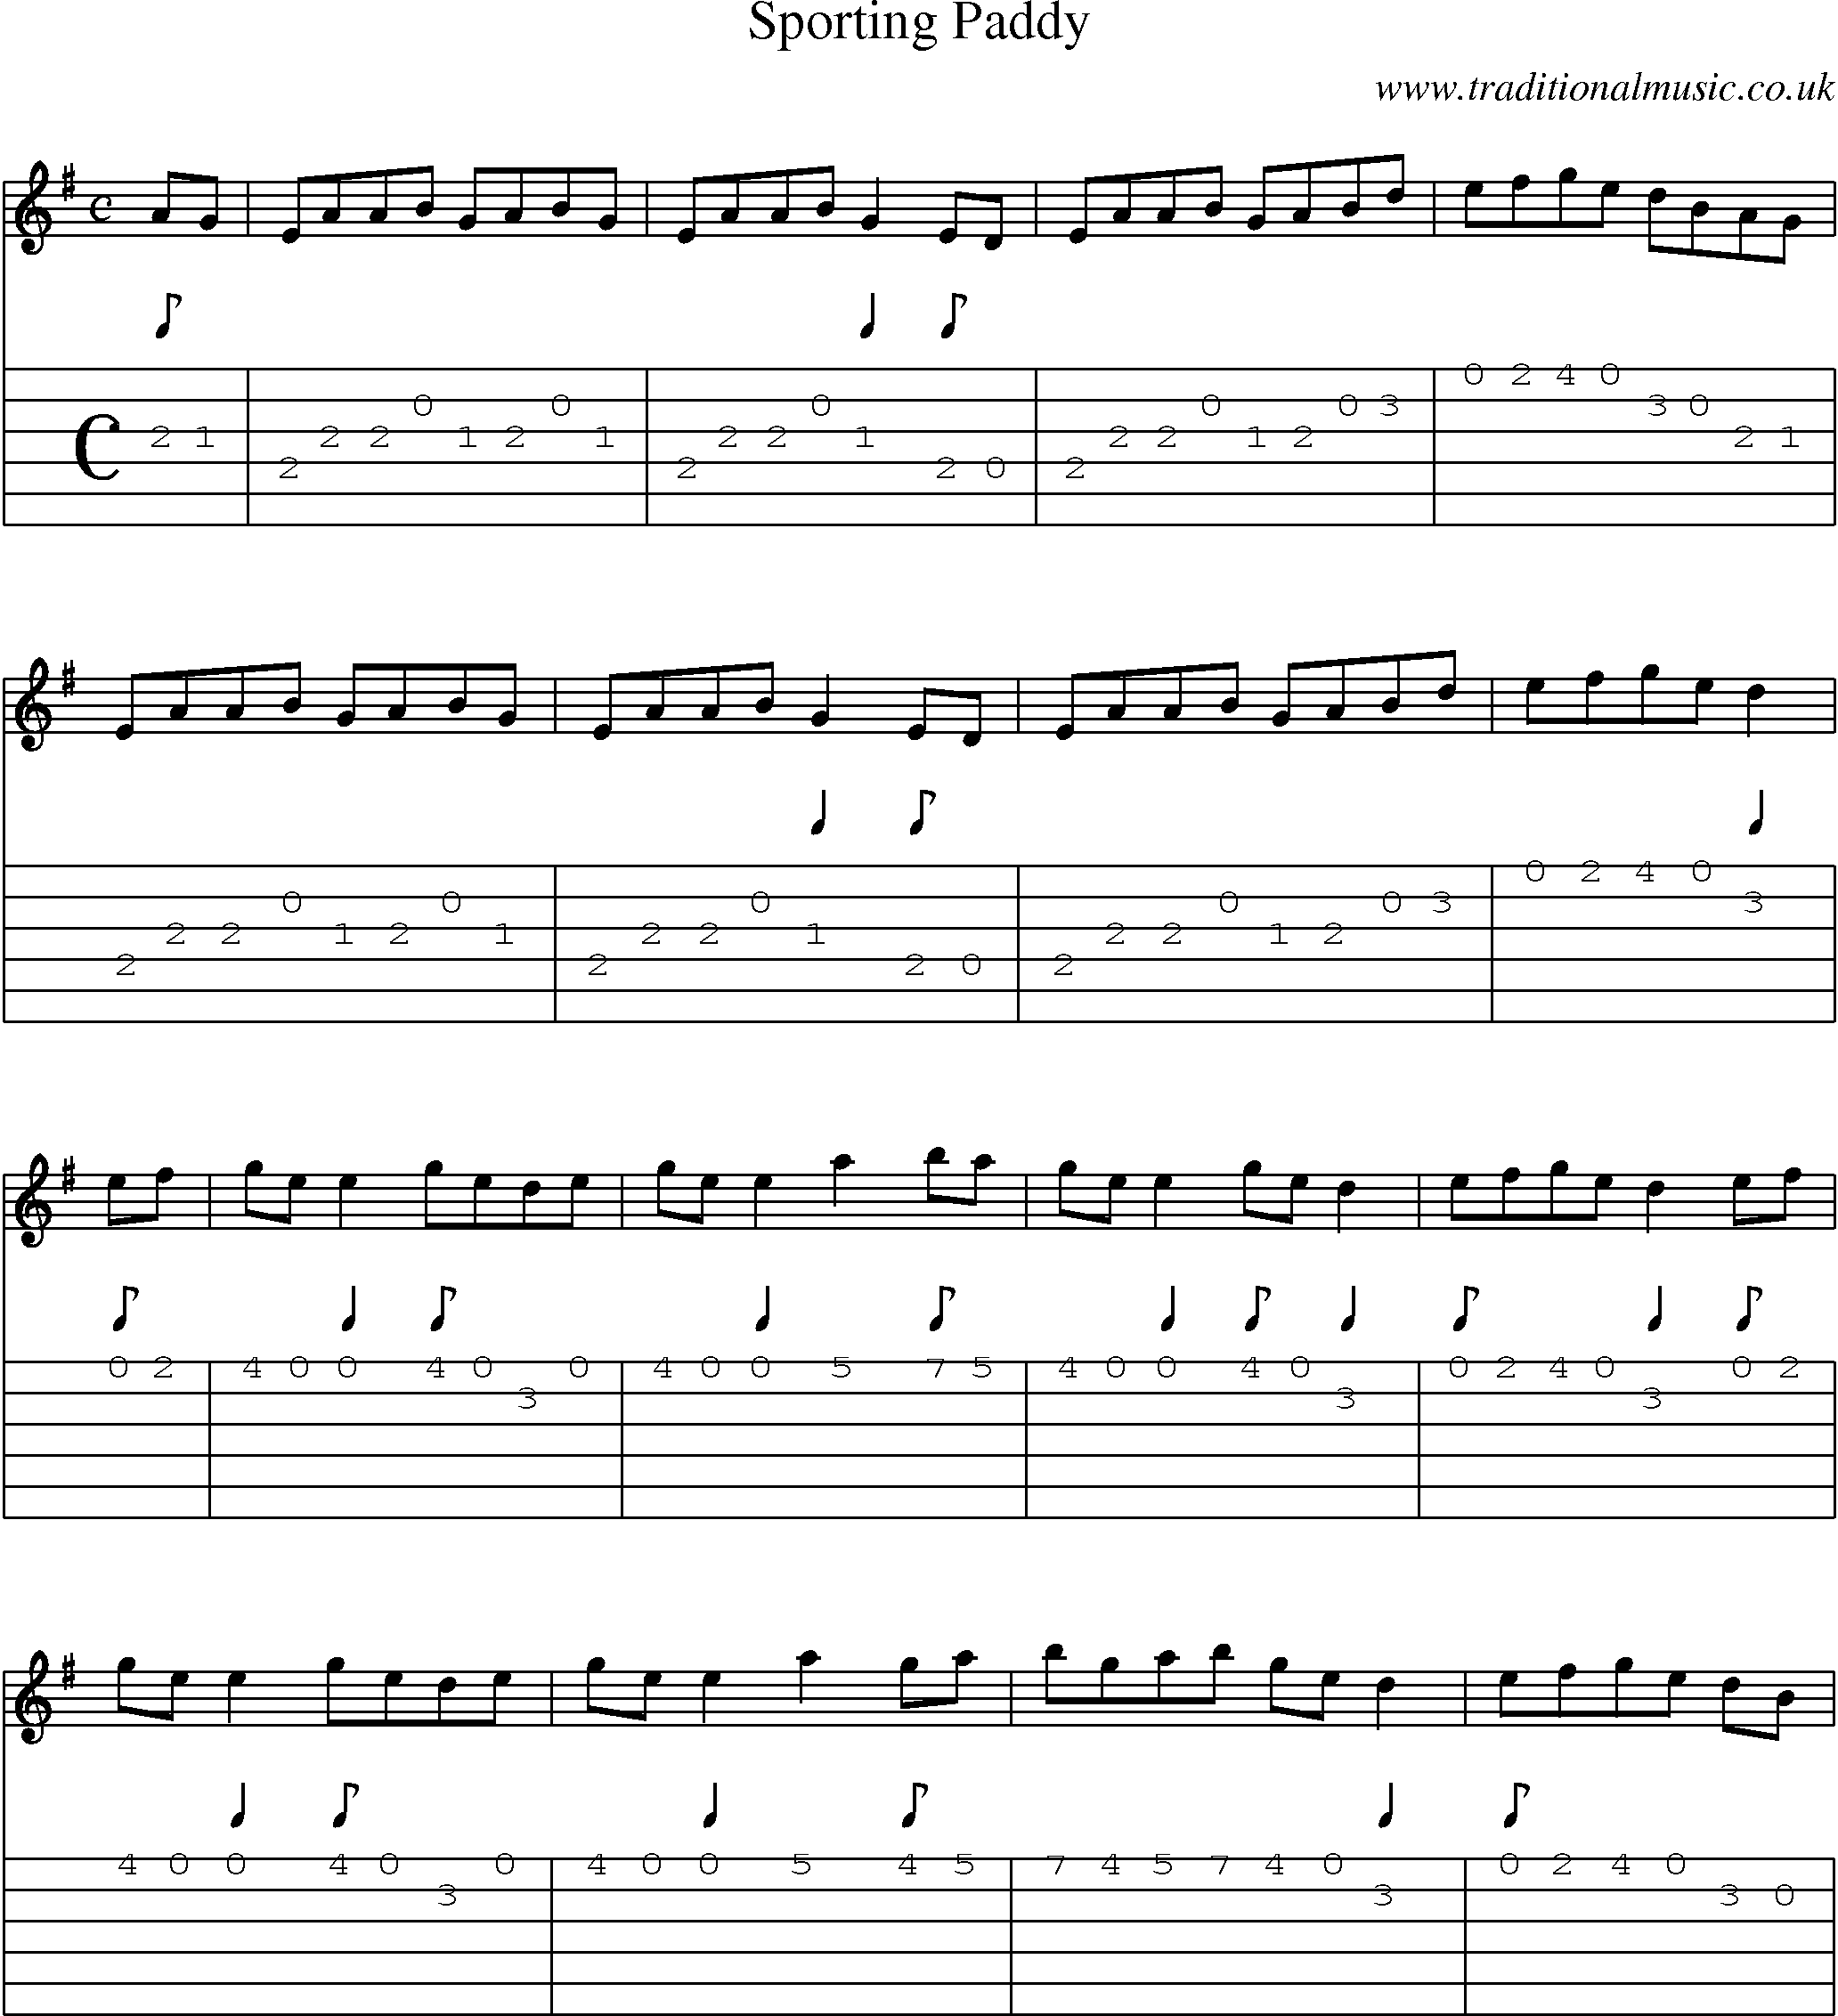 Music Score and Guitar Tabs for Sporting Paddy